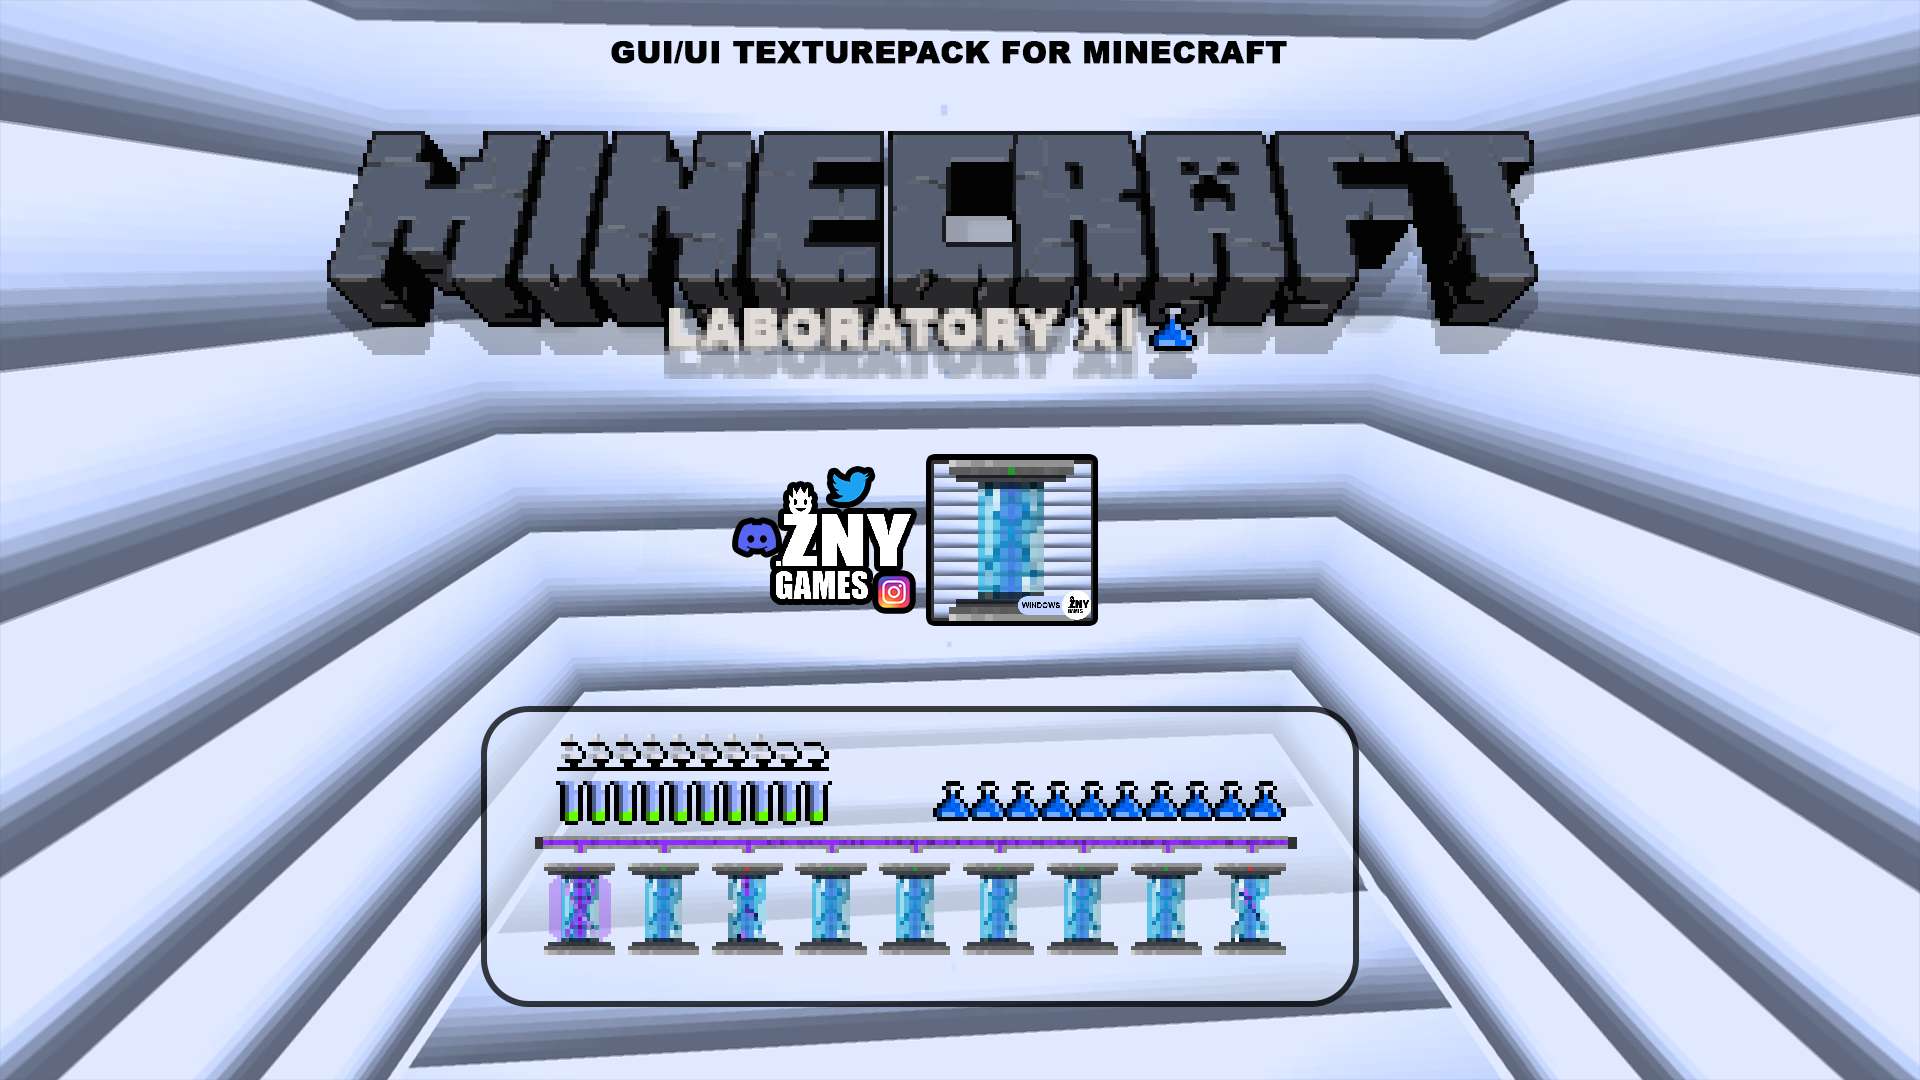 Laboratory XI [BEDROCK] 16x by znygames & zny games on PvPRP